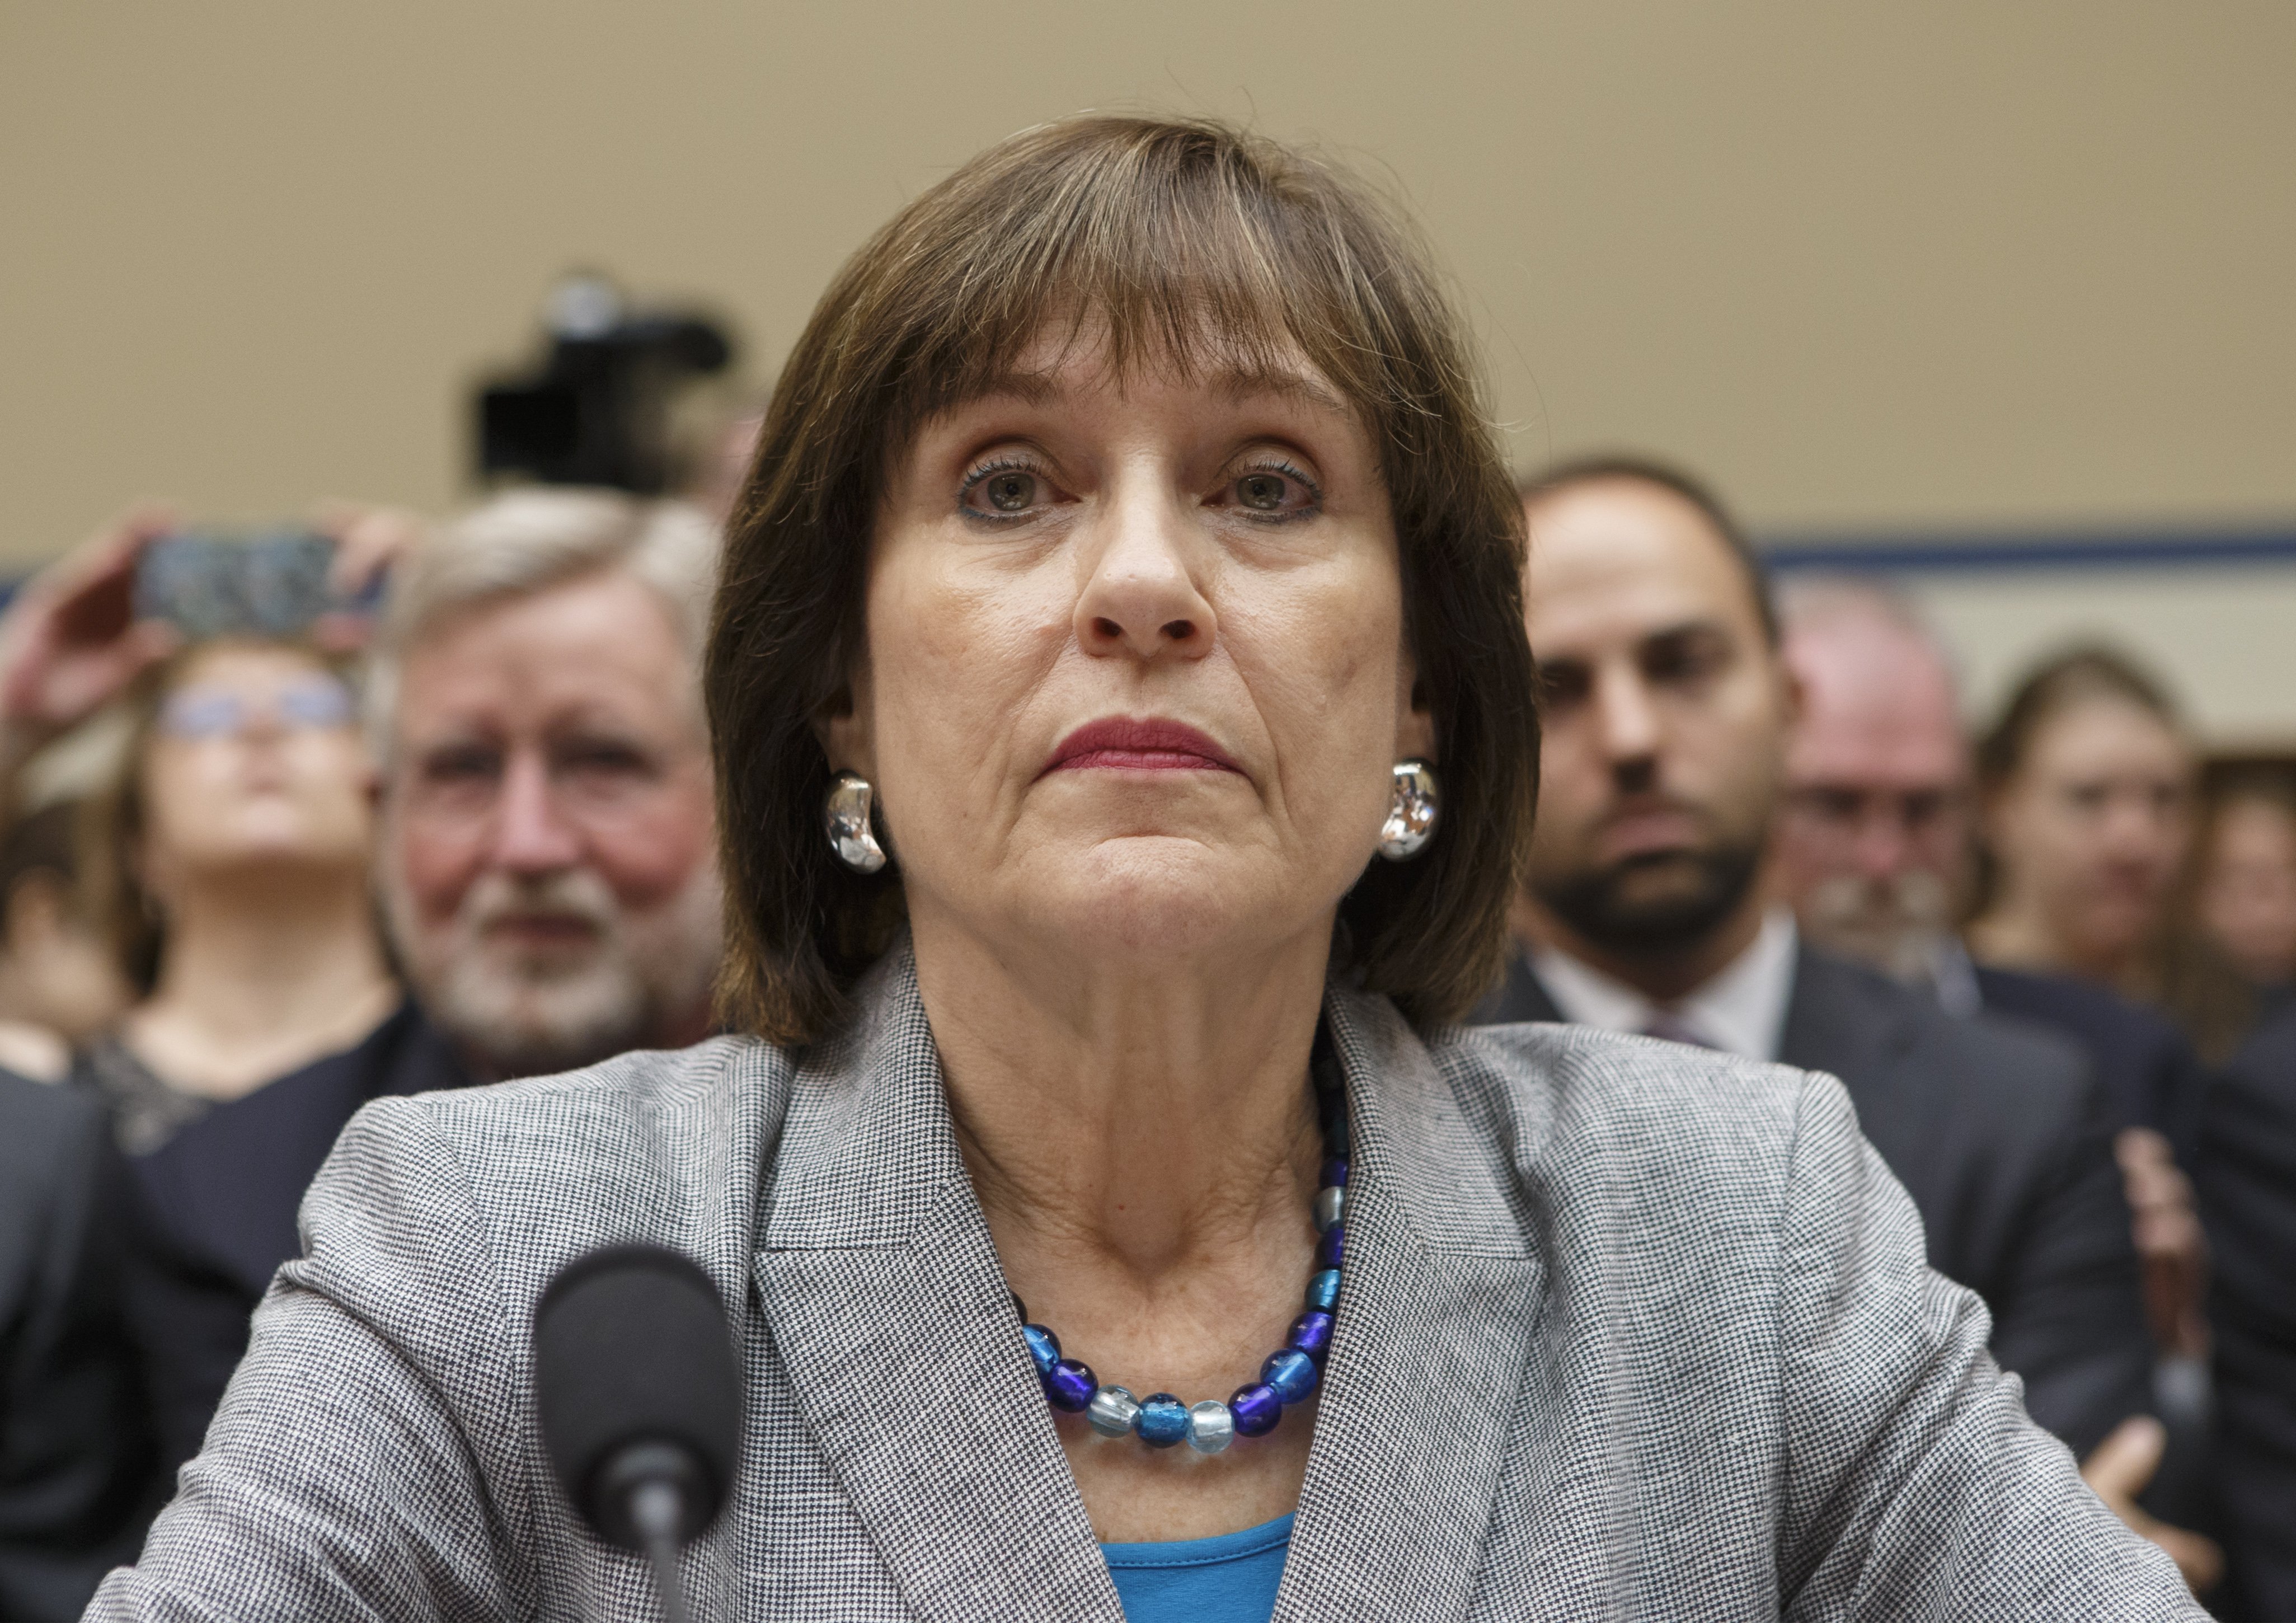 Lois LerneraInternal Revenue Service official Lois Lerner refuses to answer questions as the House Oversight Committee holds a hearing to investigate the extra scrutiny the IRS gave Tea Party and other conservative groups that applied for tax-exempt status, on Capitol Hill in Washington, D.C., on May 22, 2013.